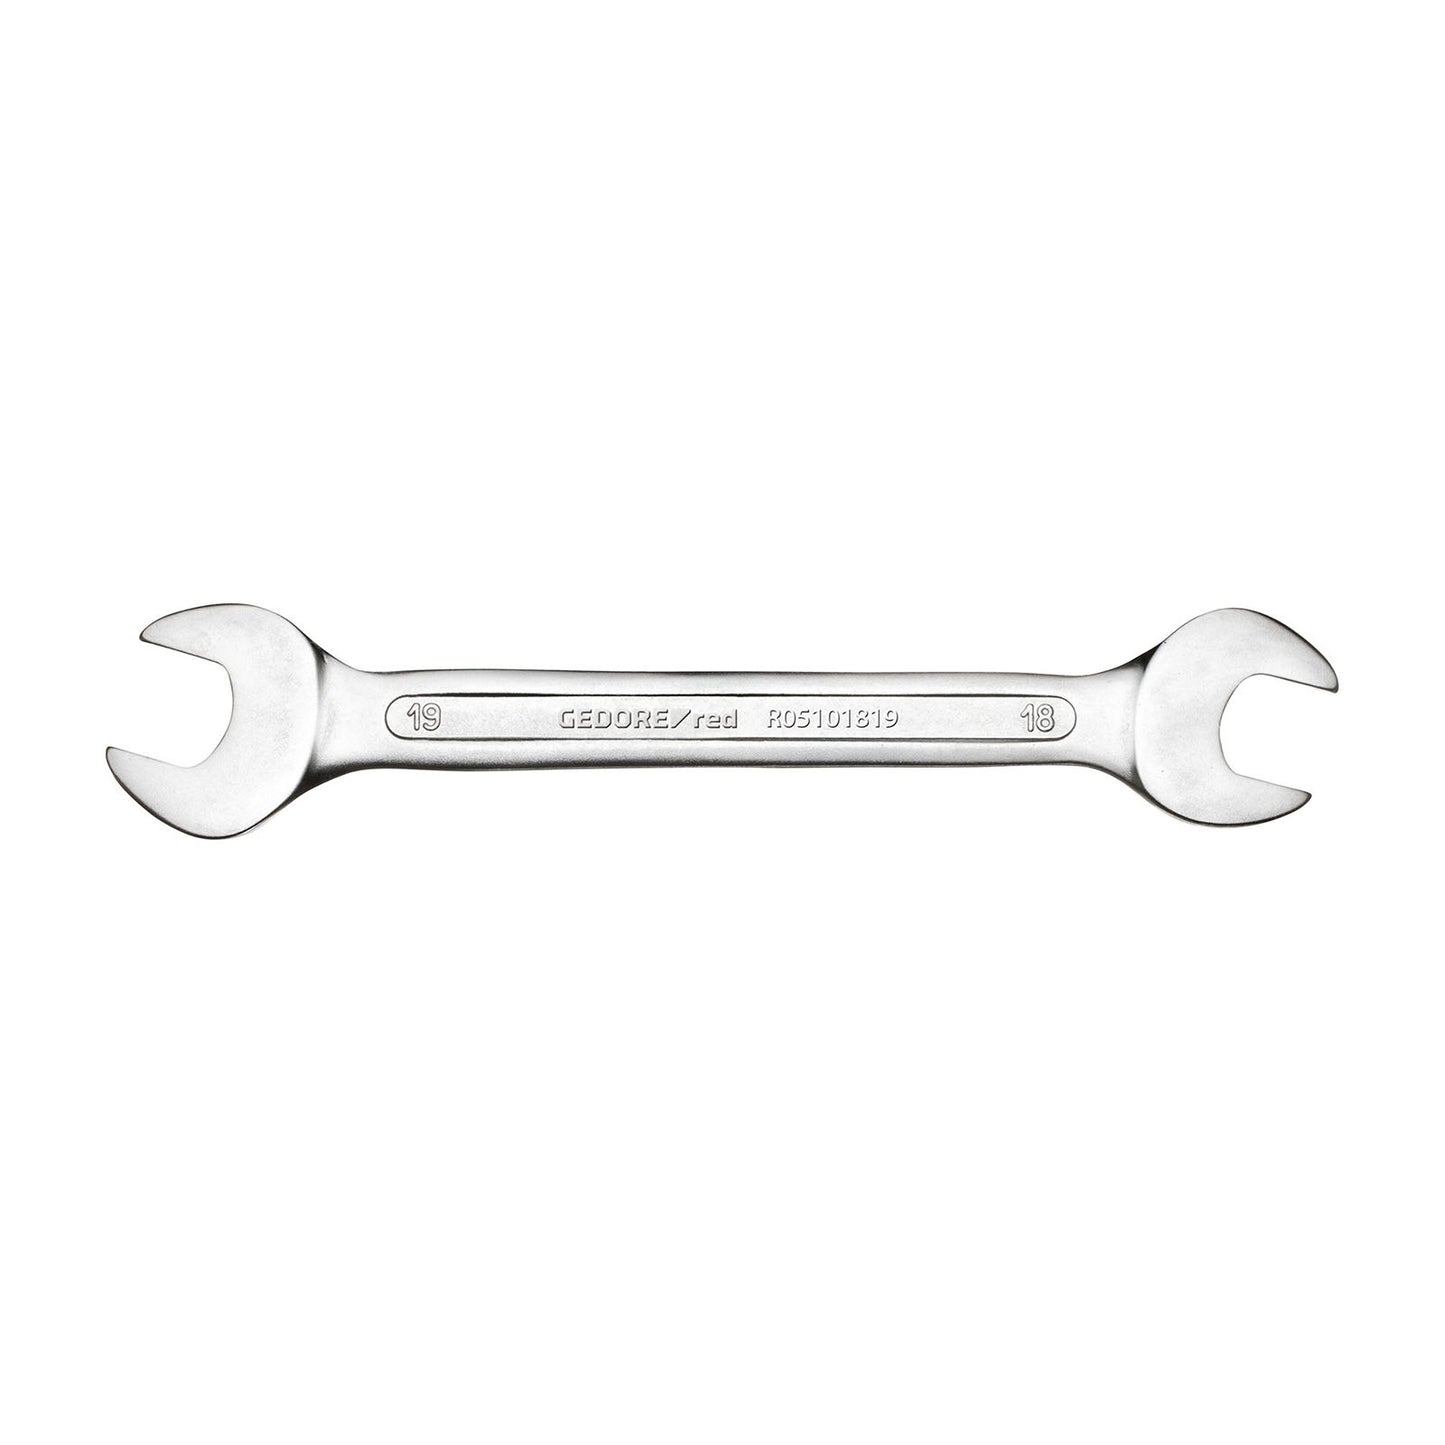 GEDORE red R05101415 - Double open end wrench 14x15 mm L=188 mm (3300940)